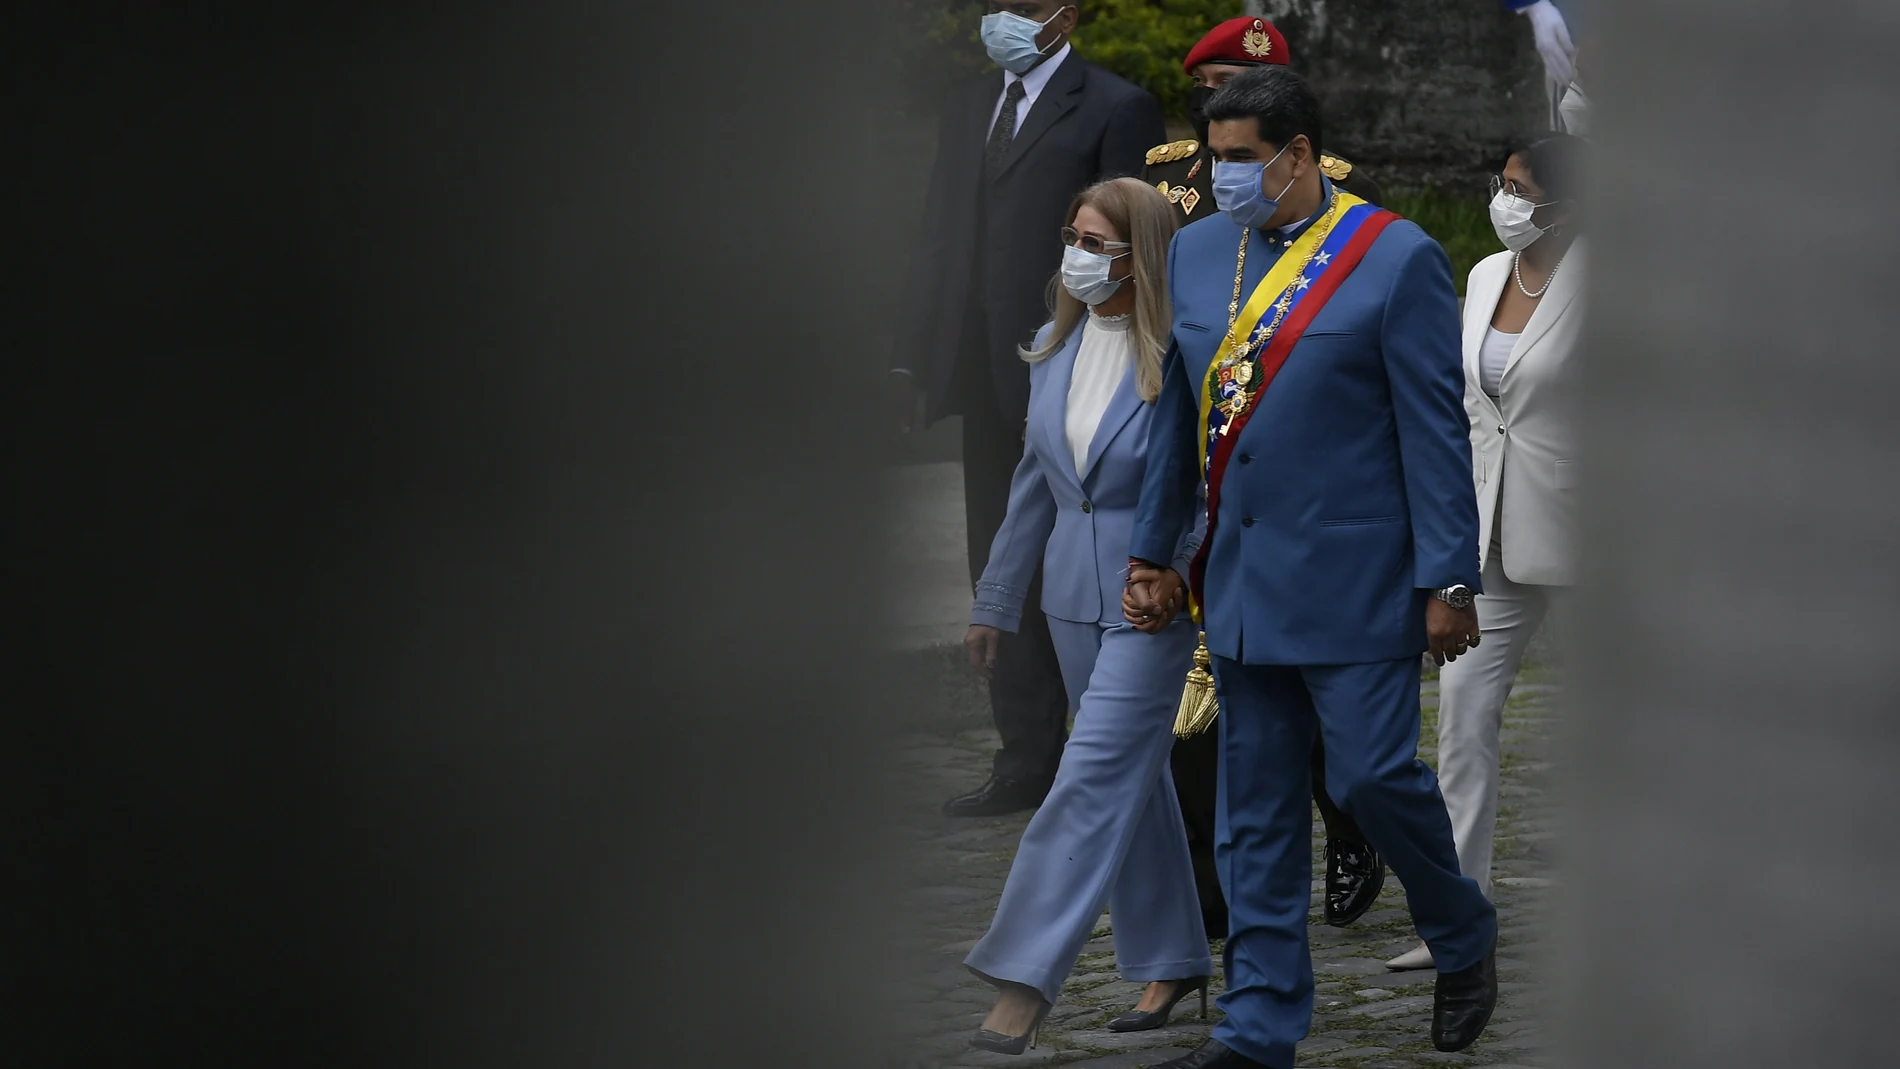 Accompanied by first lady Cilia Flores, left, Venezuelan President Nicolas Maduro arrives to give his annual address to the nation before lawmakers at the National Assembly in Caracas, Venezuela, Tuesday, Jan. 12, 2021. (AP Photo/Matias Delacroix)